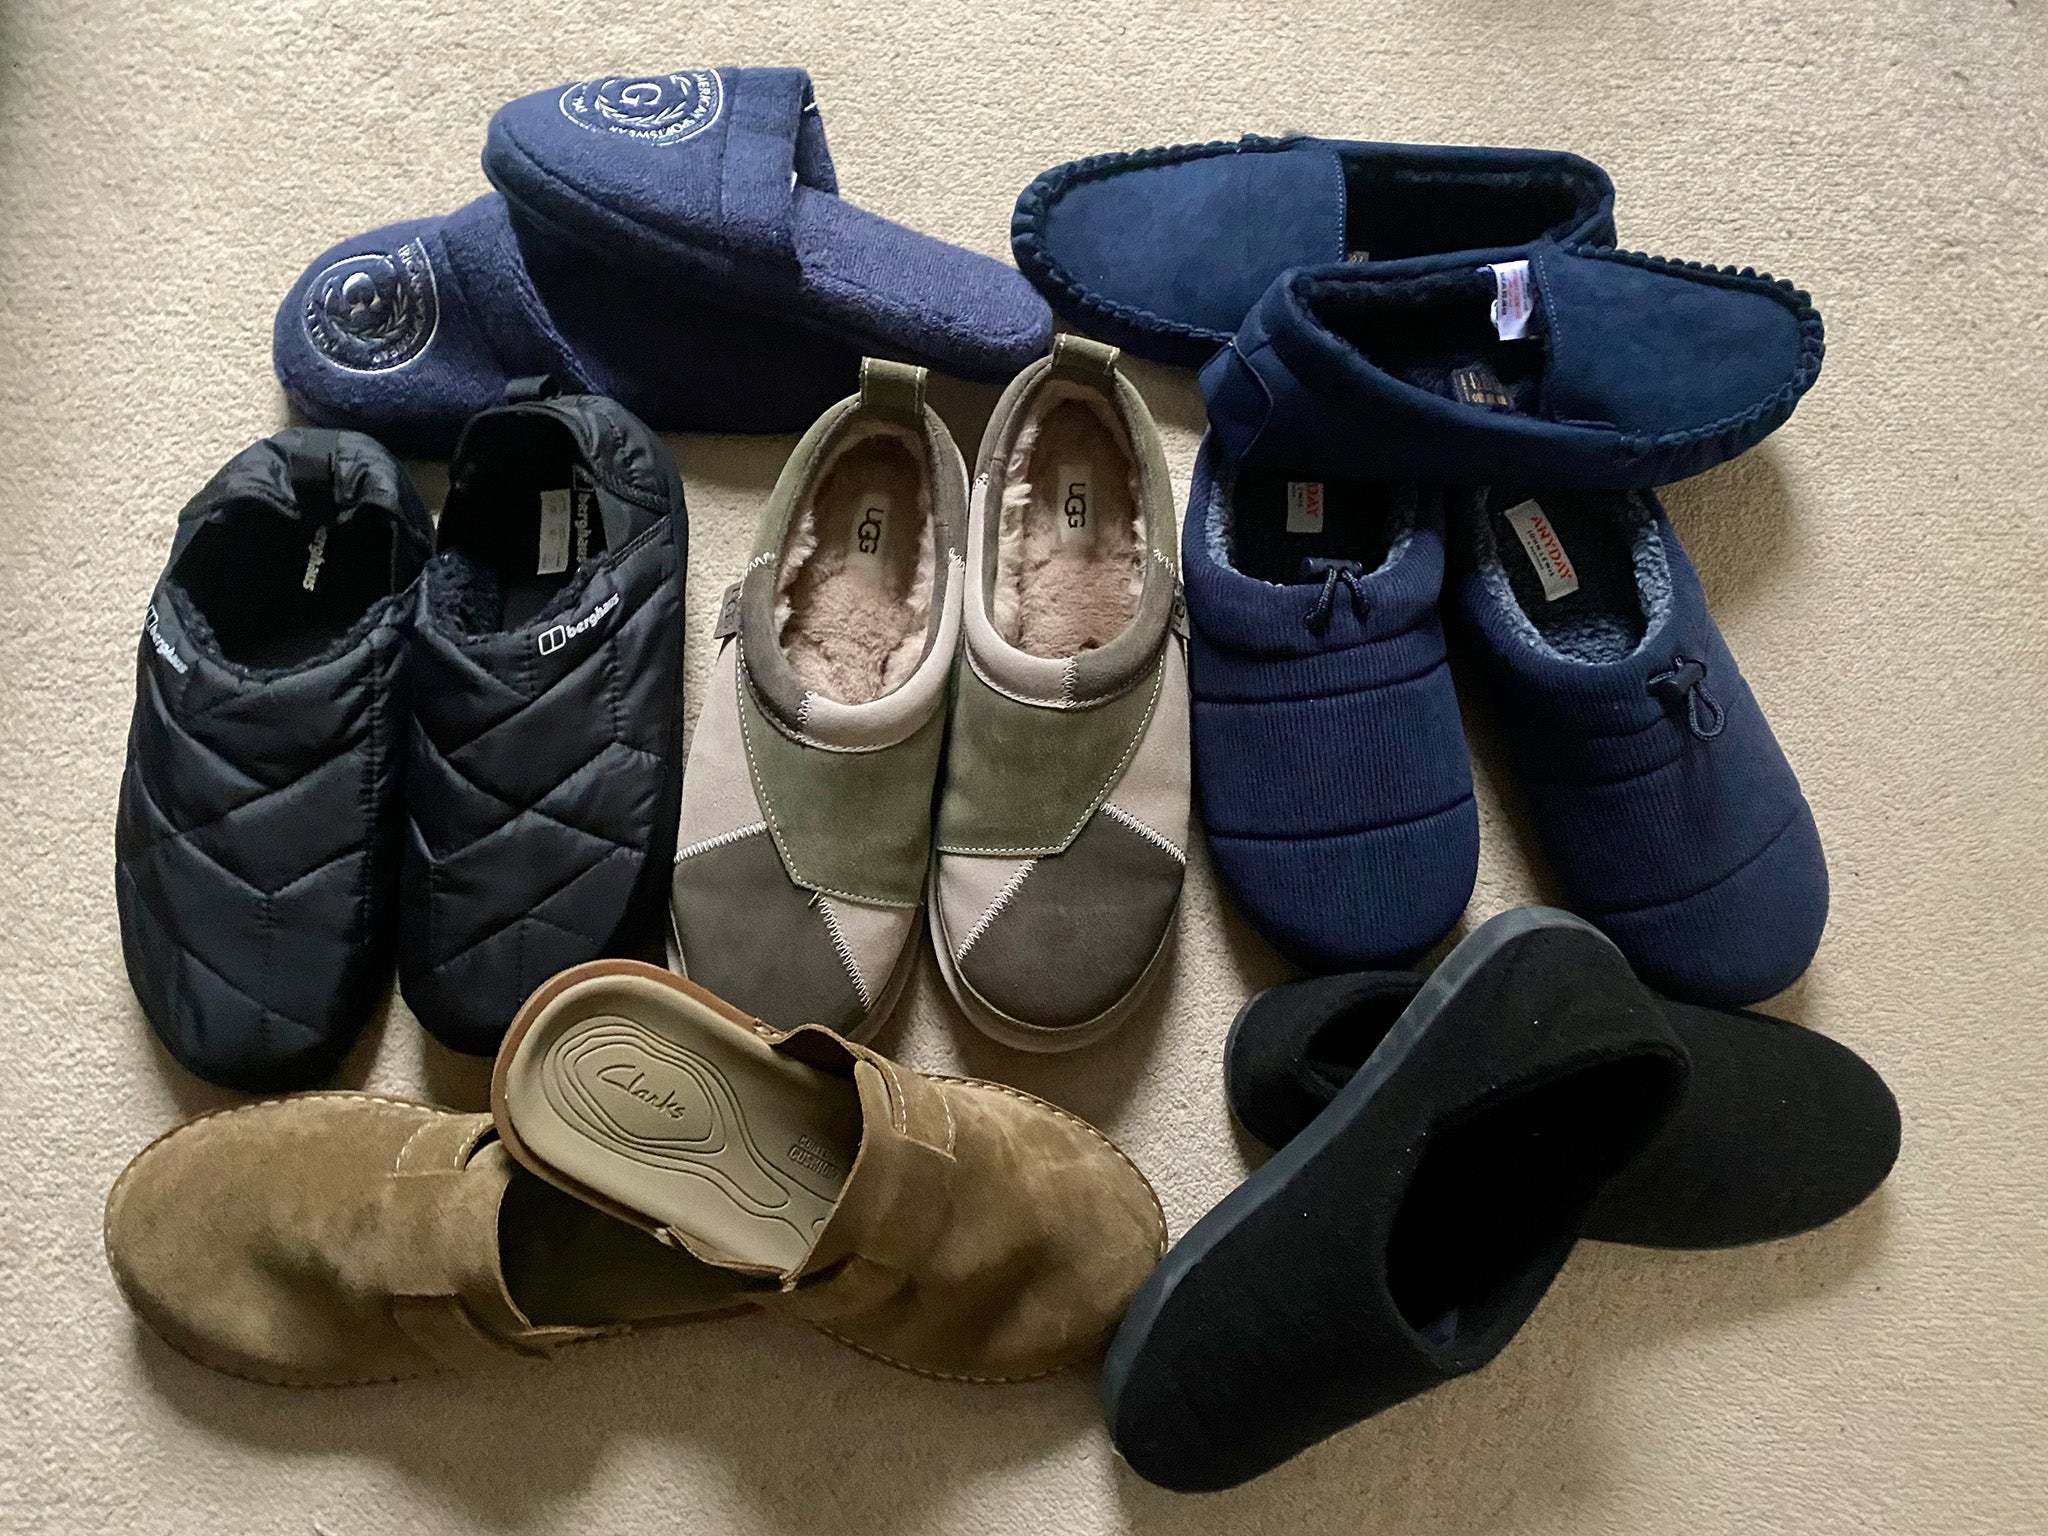 A few of the men’s slippers we tested